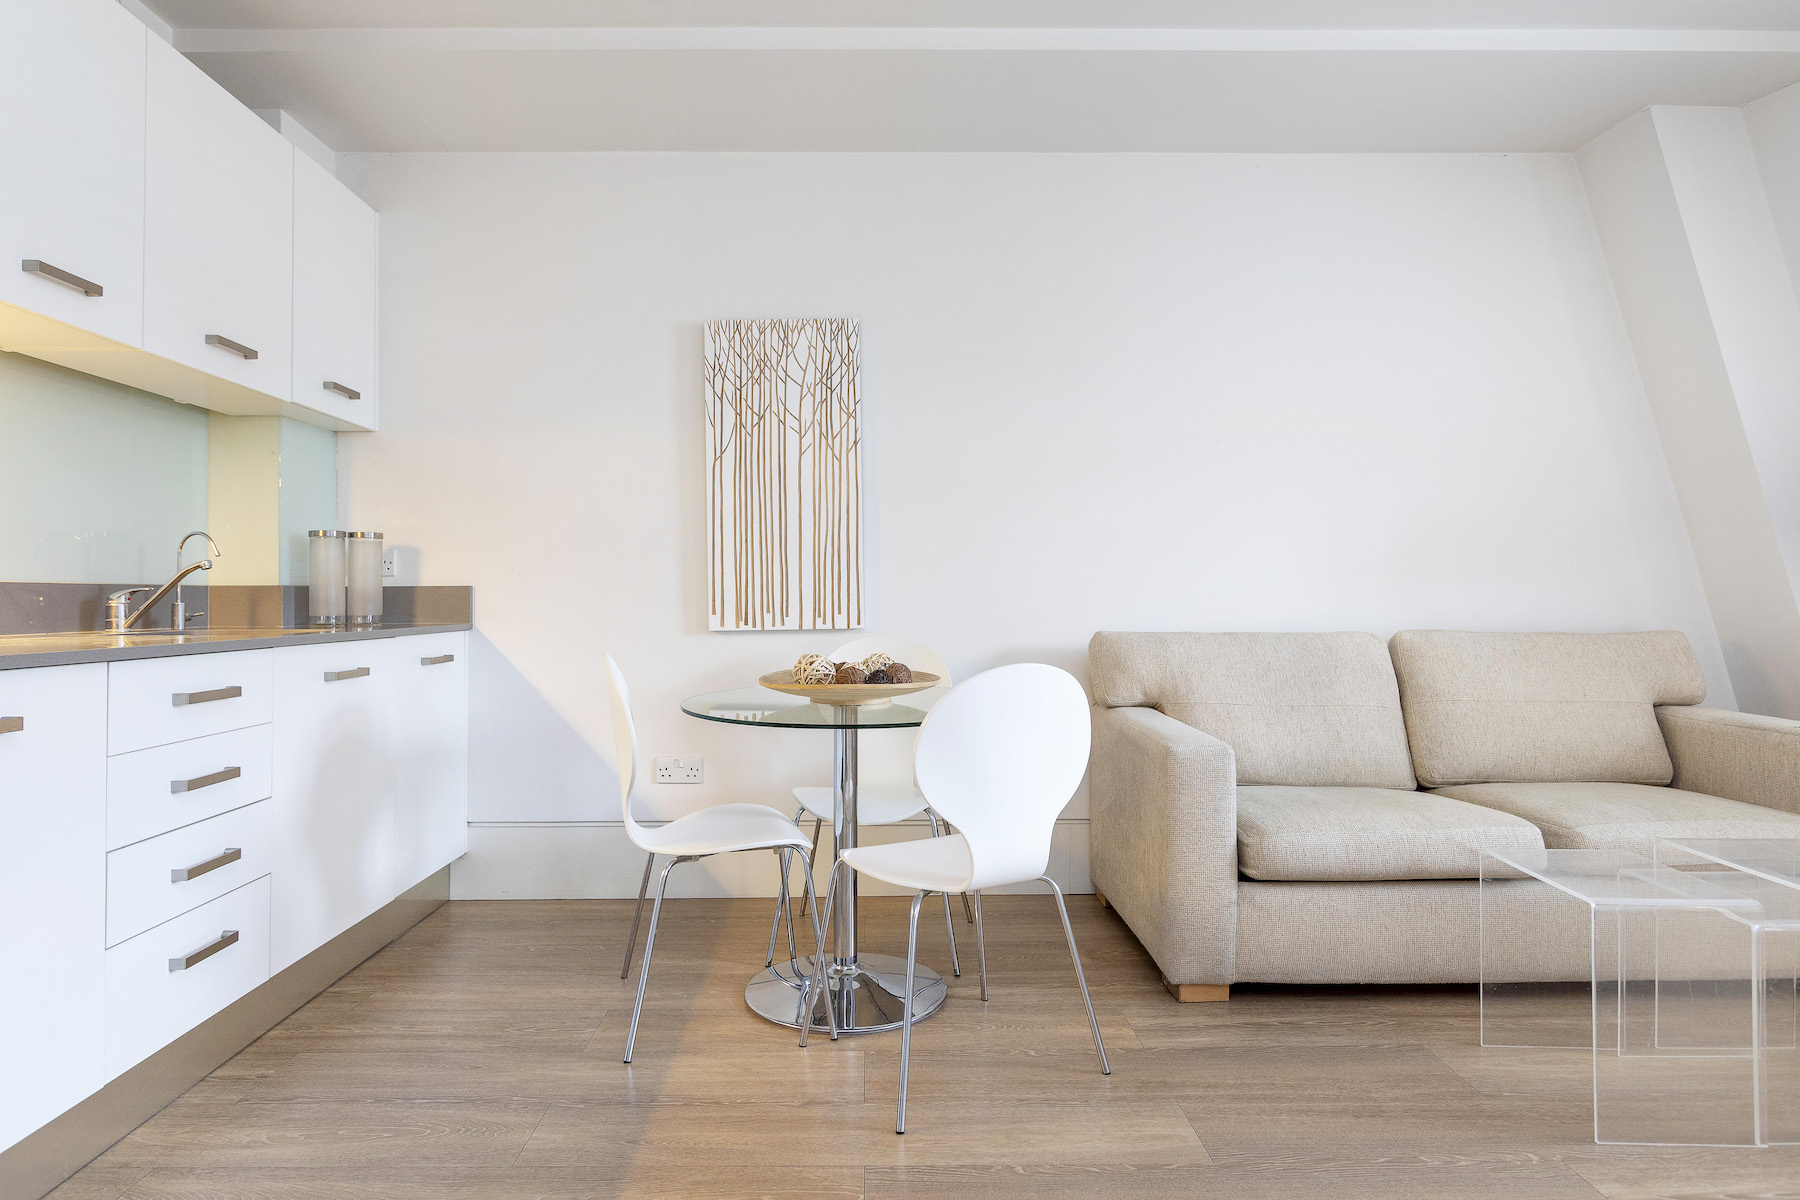 Furnishing Buy-to-Let Properties: How to Decide